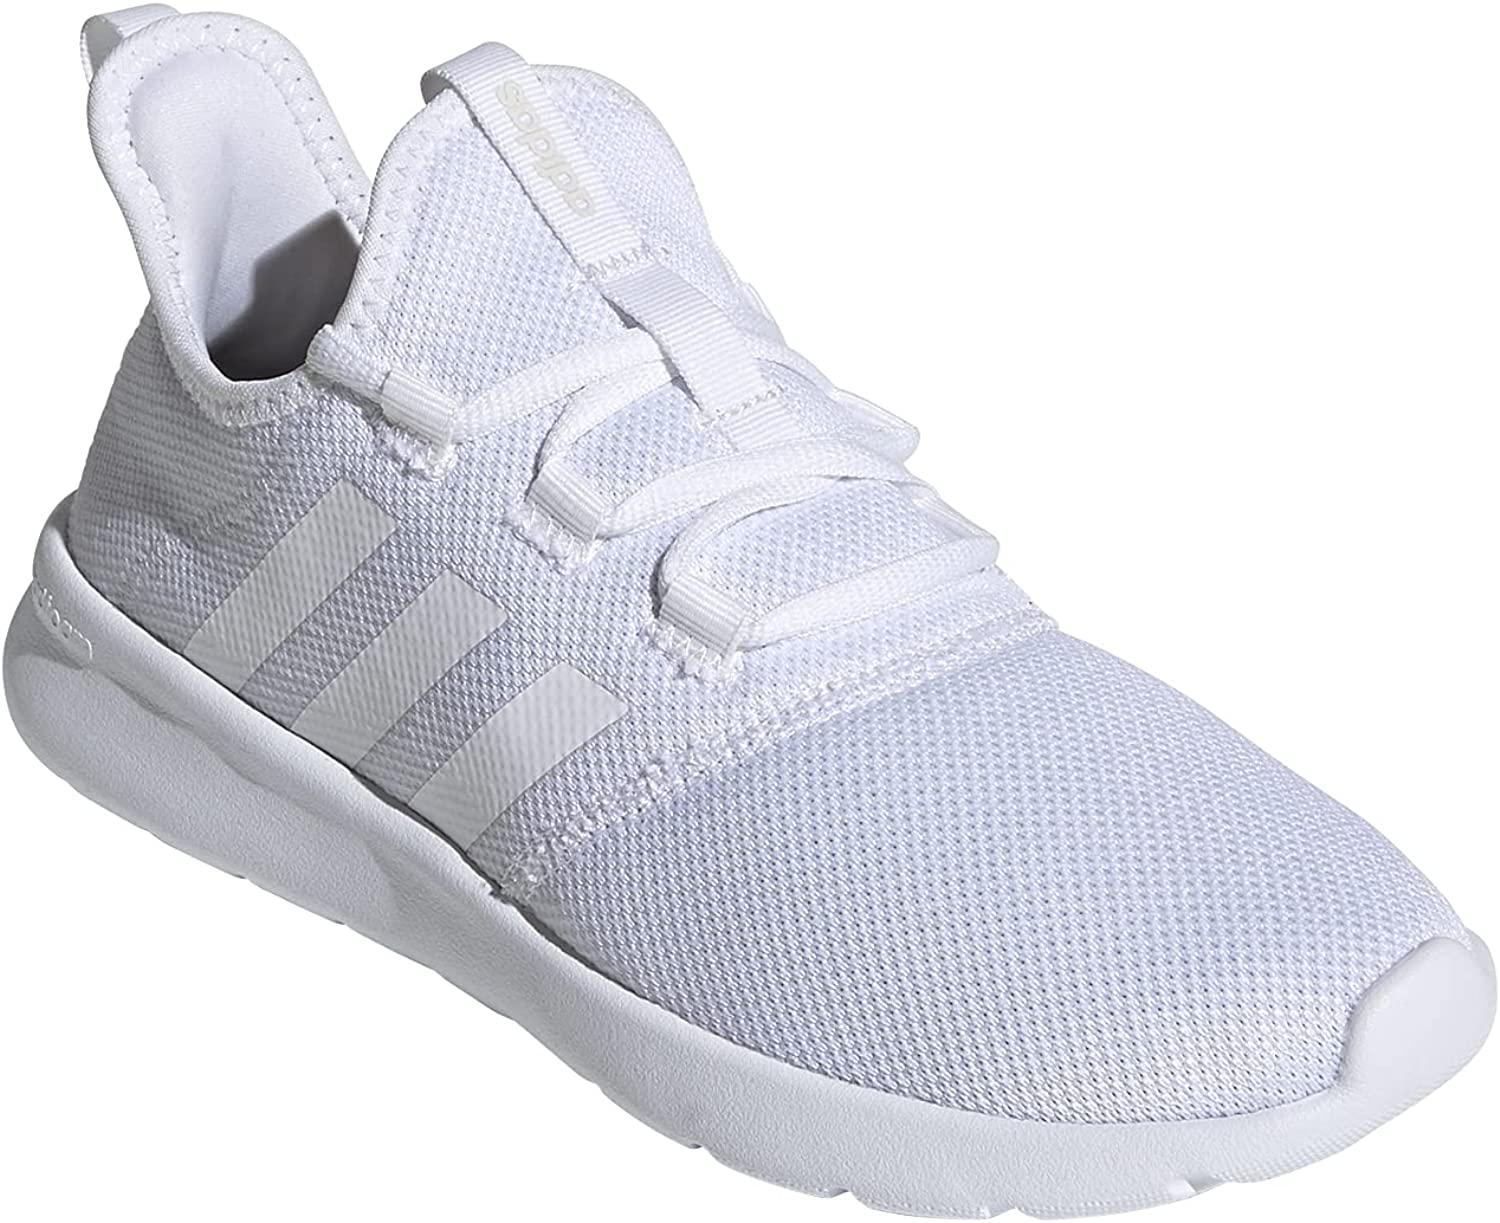 Buy Adidas Women Synthetic Questeron W Running Shoe  BLUDAW/SILVMT/Conavy/Stone (UK-4) at Amazon.in